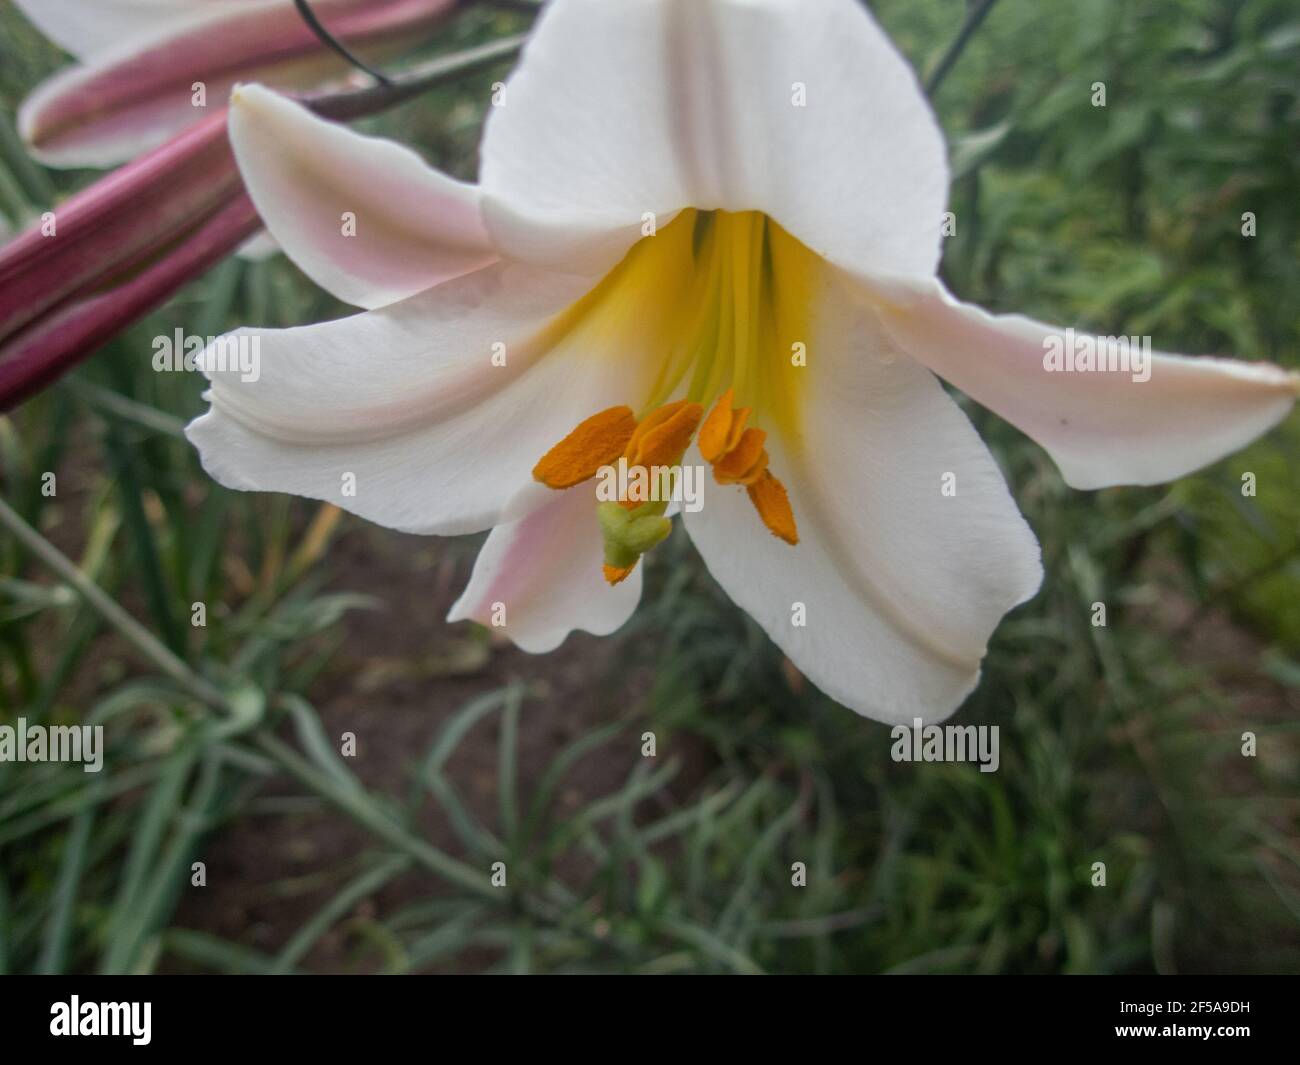 Beautiful Lily flower on green leaves background. Lilium longiflorum flowers in the garden. Background texture plant fire lily with orange buds. Image Stock Photo